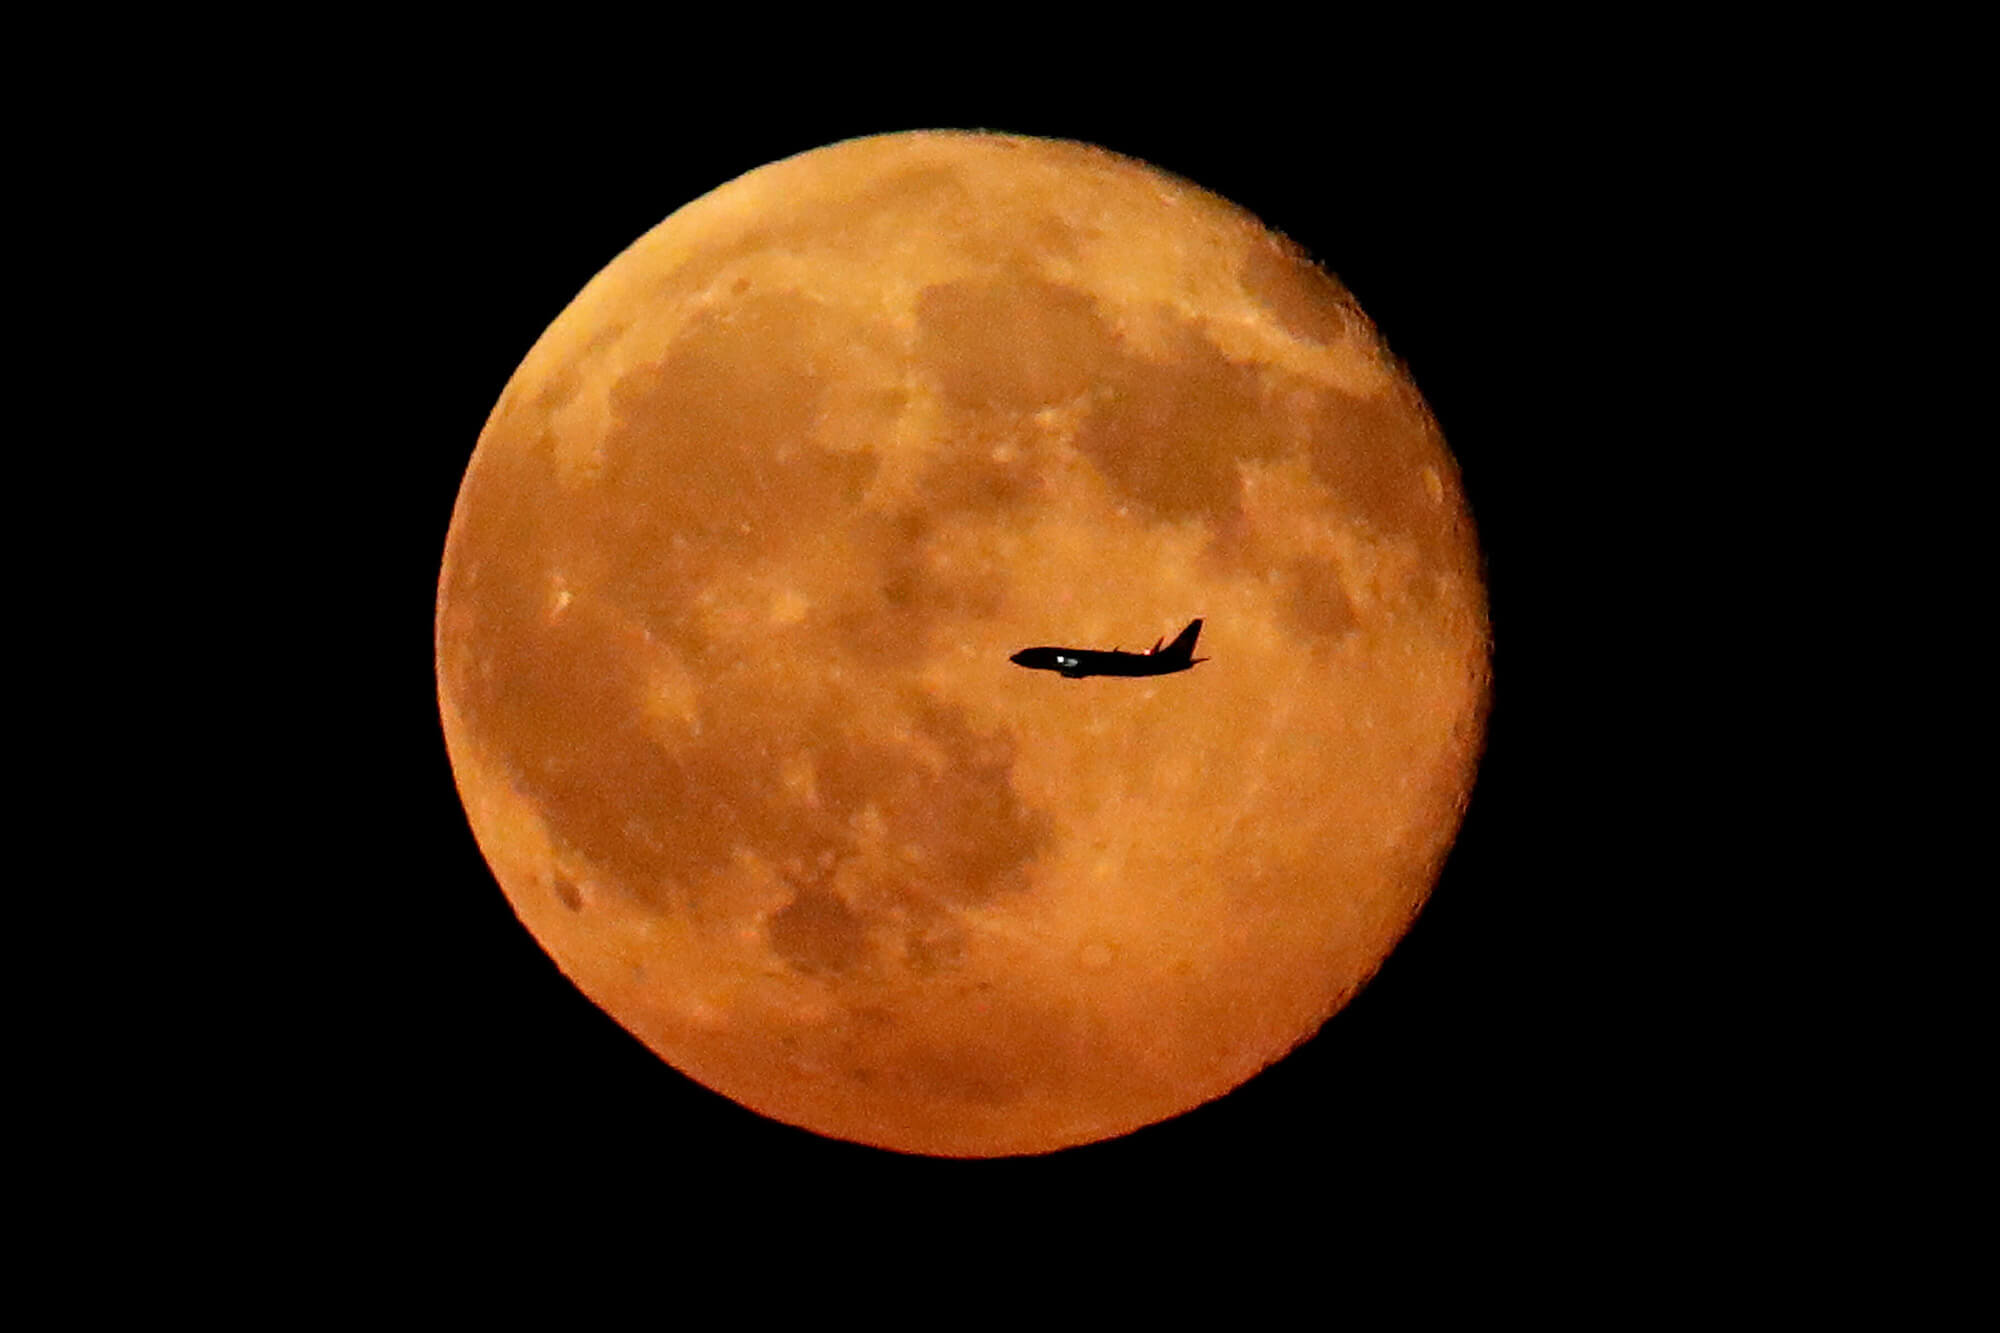 Image of the moon with plane in front of it.